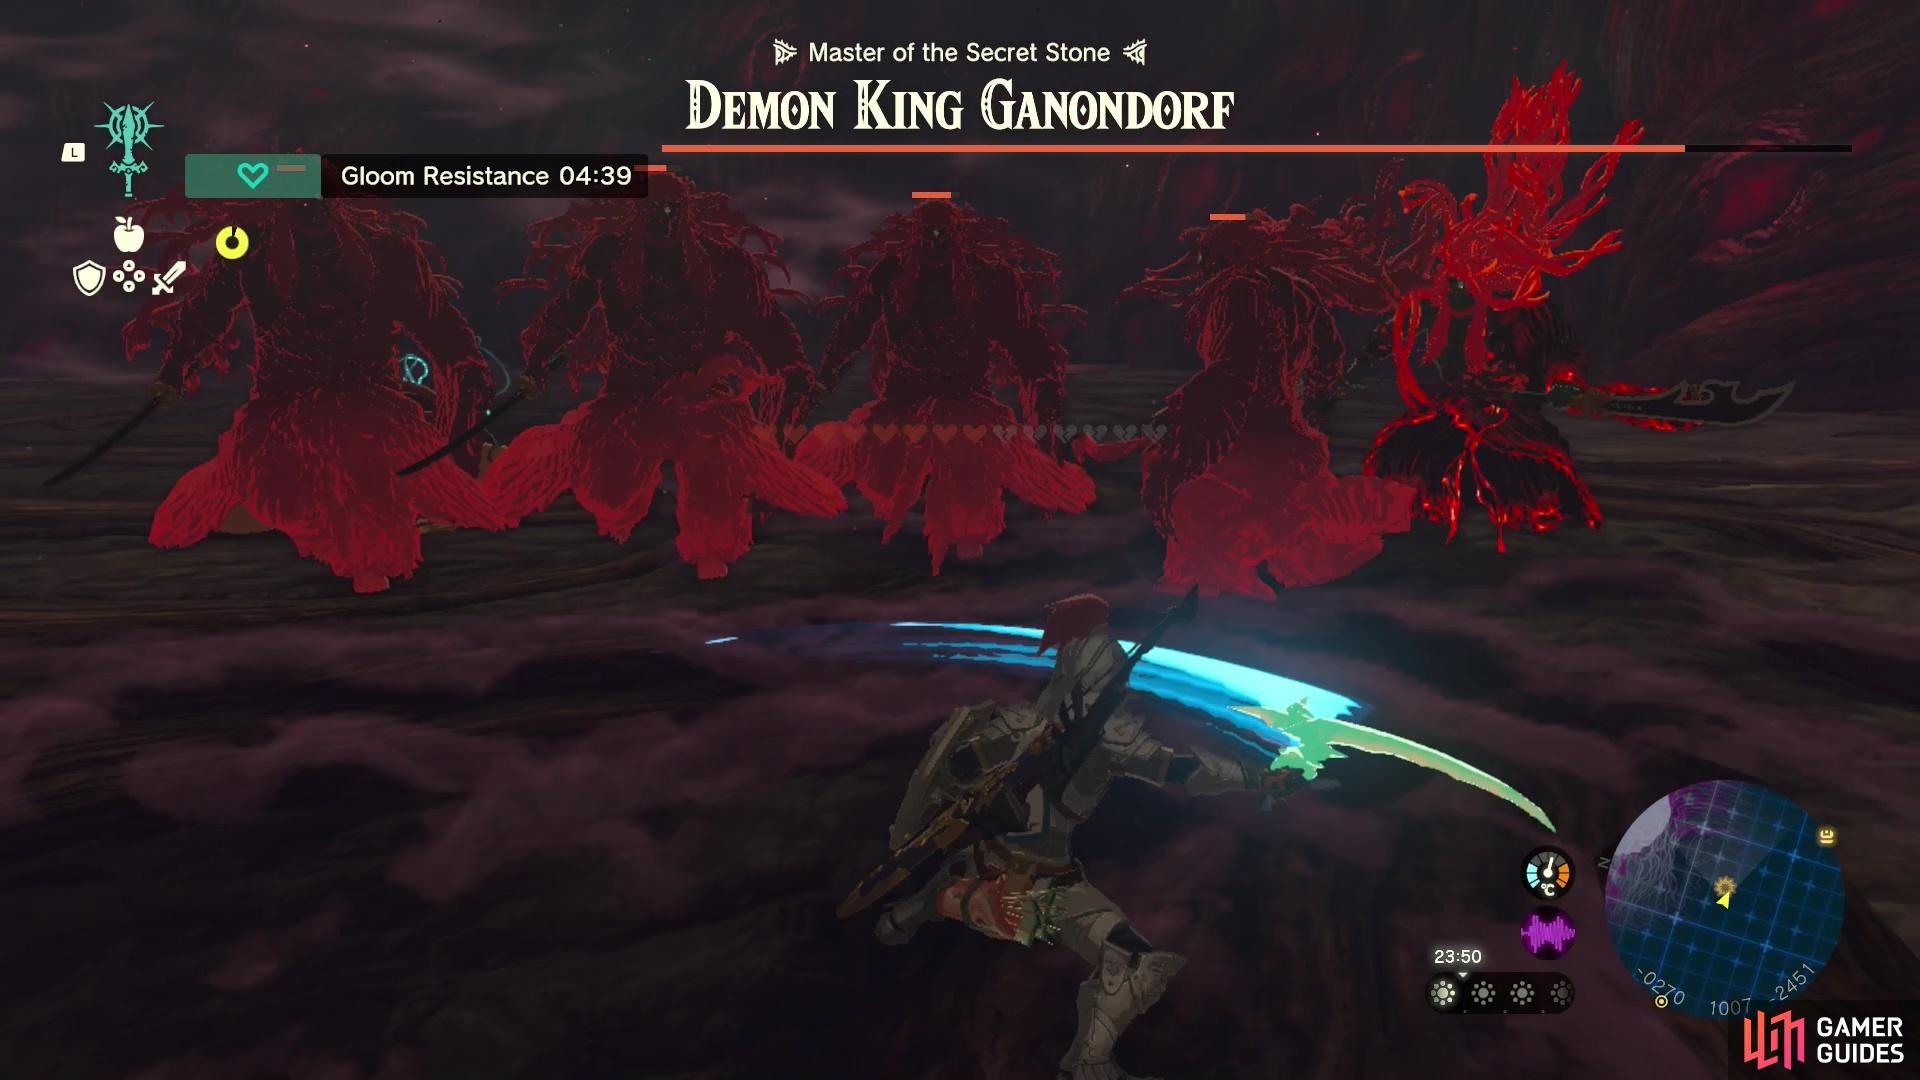 Ganondorf summons up a bunch of Ganons to help in the fight…but we’ve got our Sage buddies too!